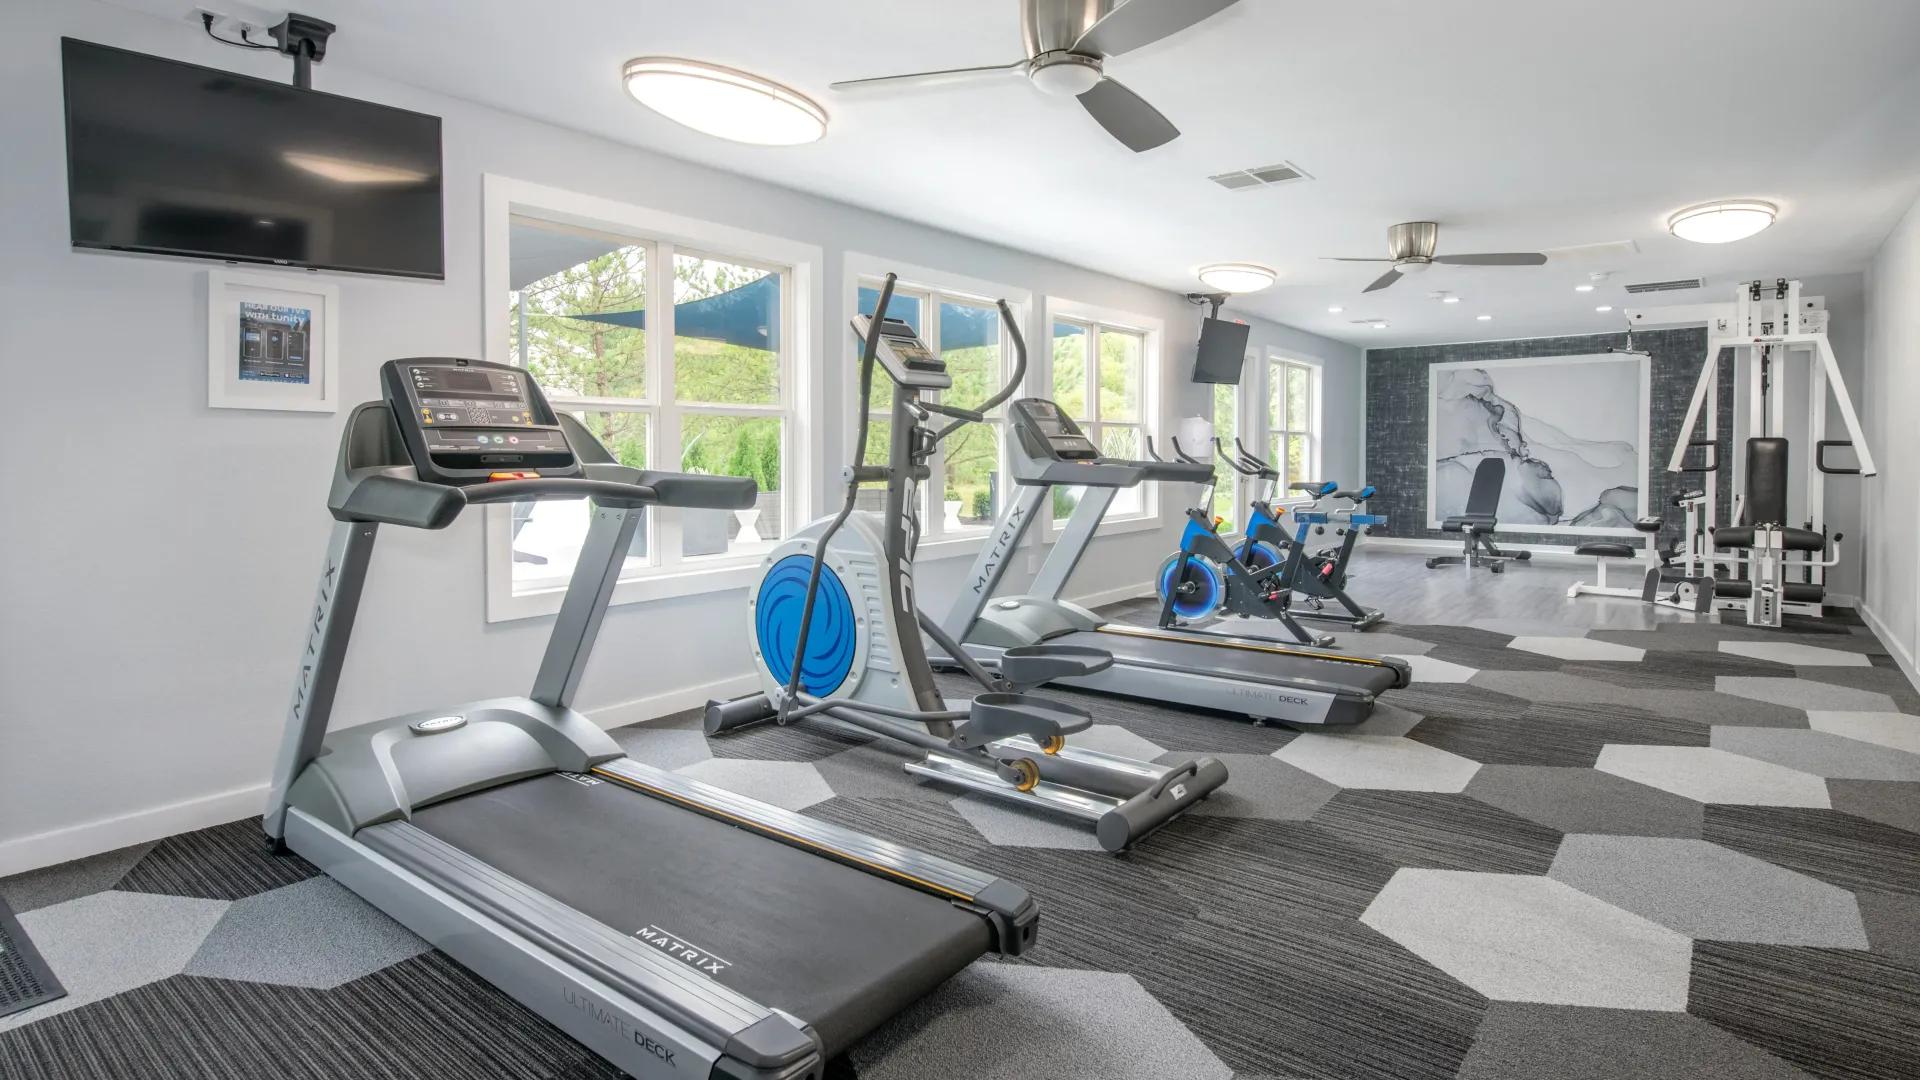 Modern fitness center with cardio and weight equipment with ceiling fans to help you feel cool while you work up a sweat.